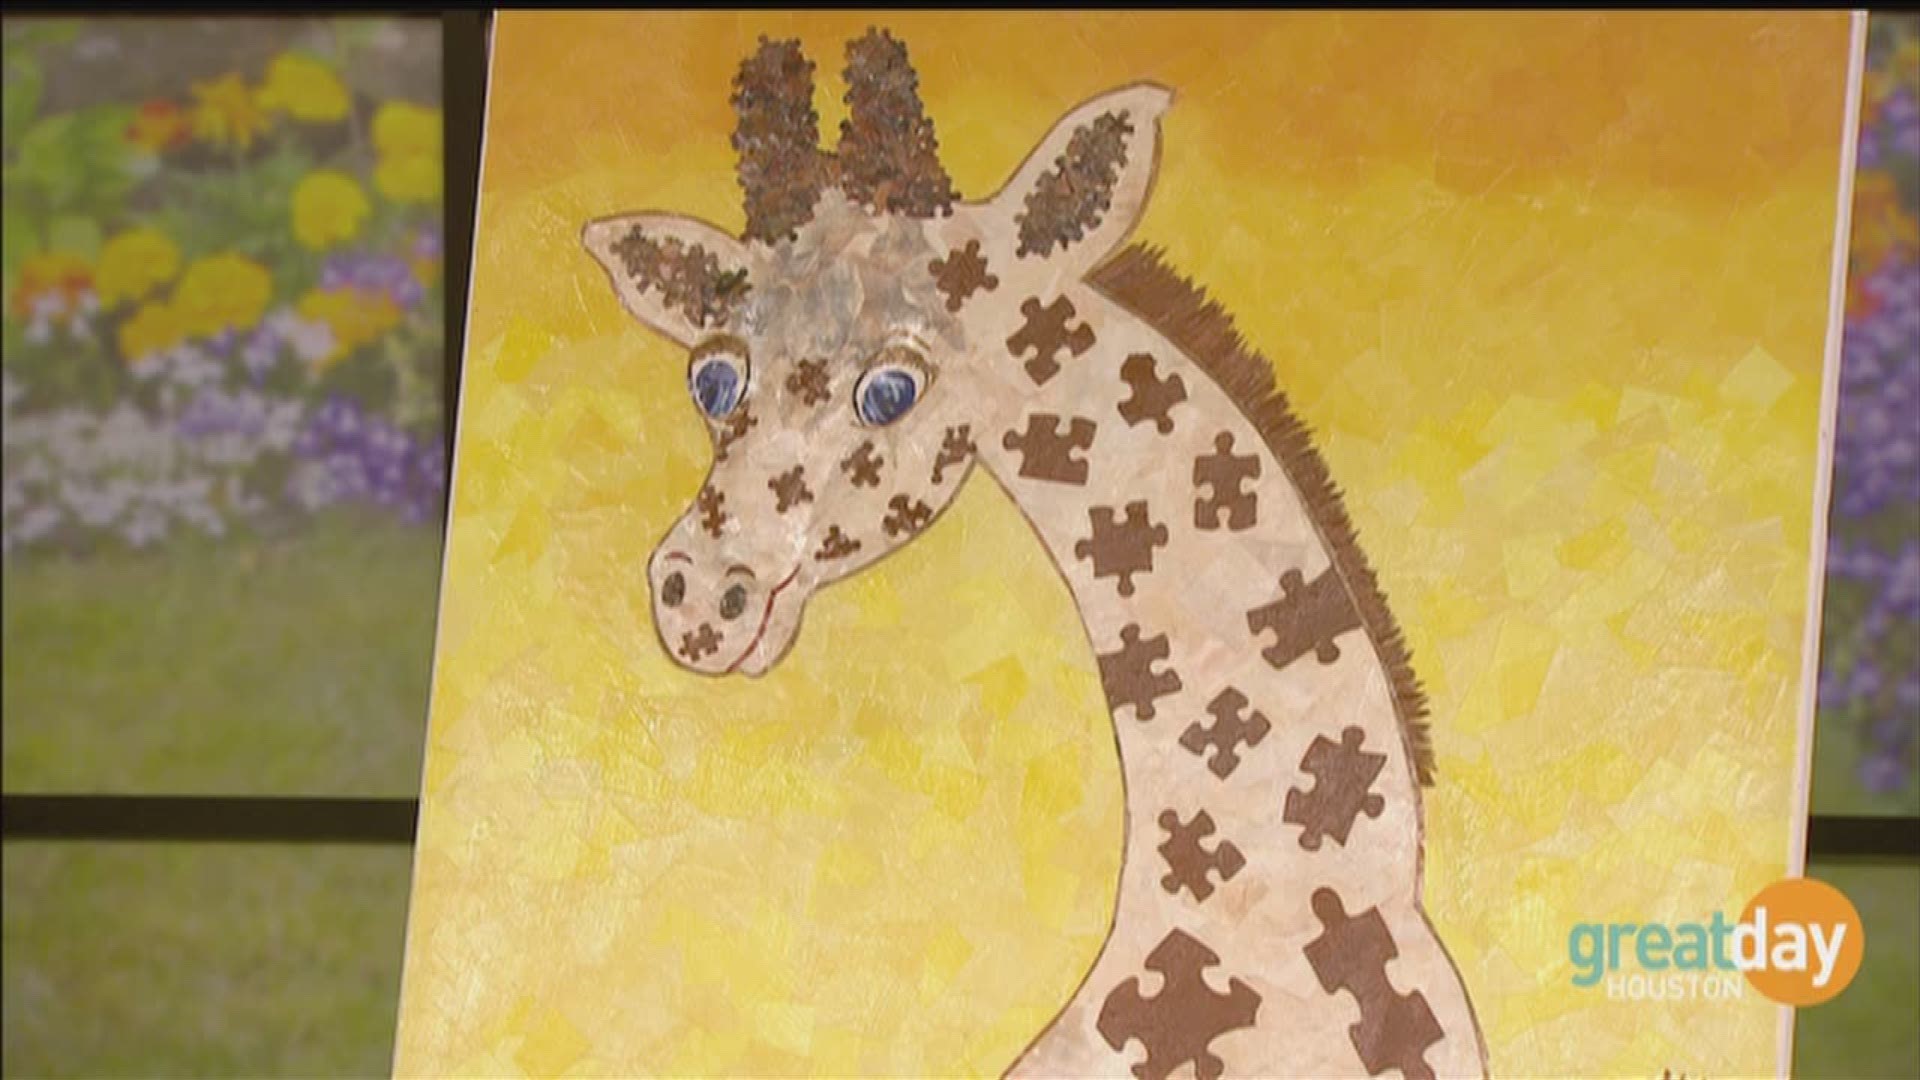 Eco-artist Grant Manier and author Julie Coy Manier share the story of Grant the Jigsaw Giraffe.